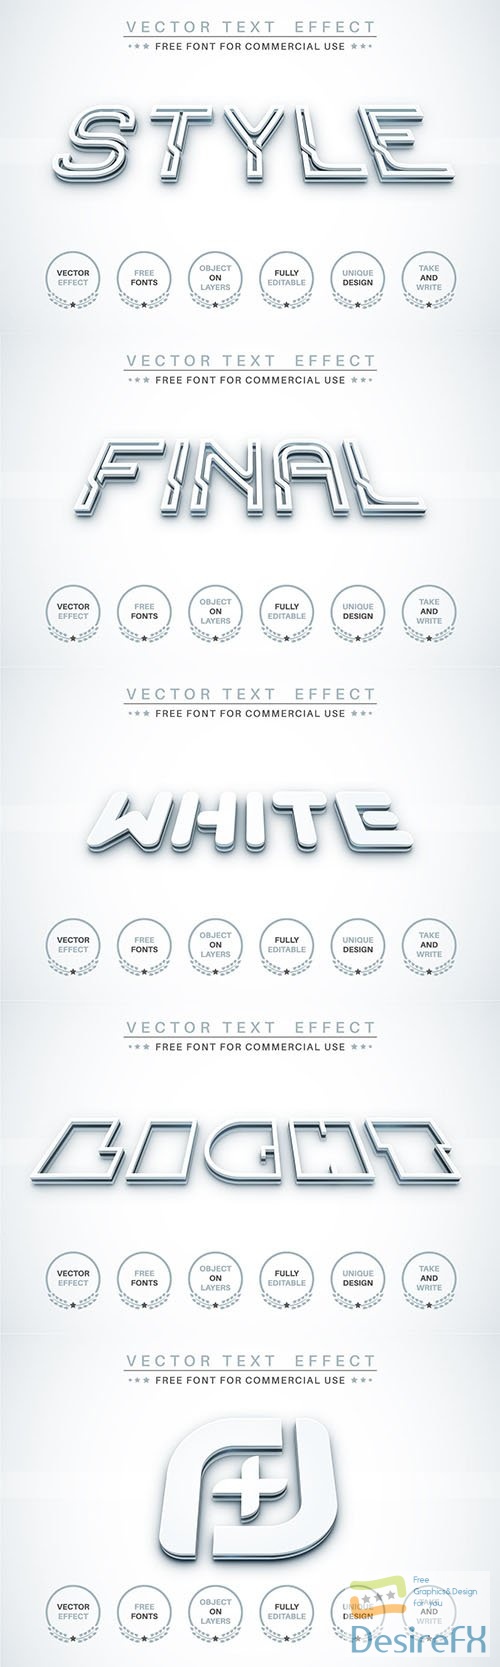 3D White - editable text effect, font style